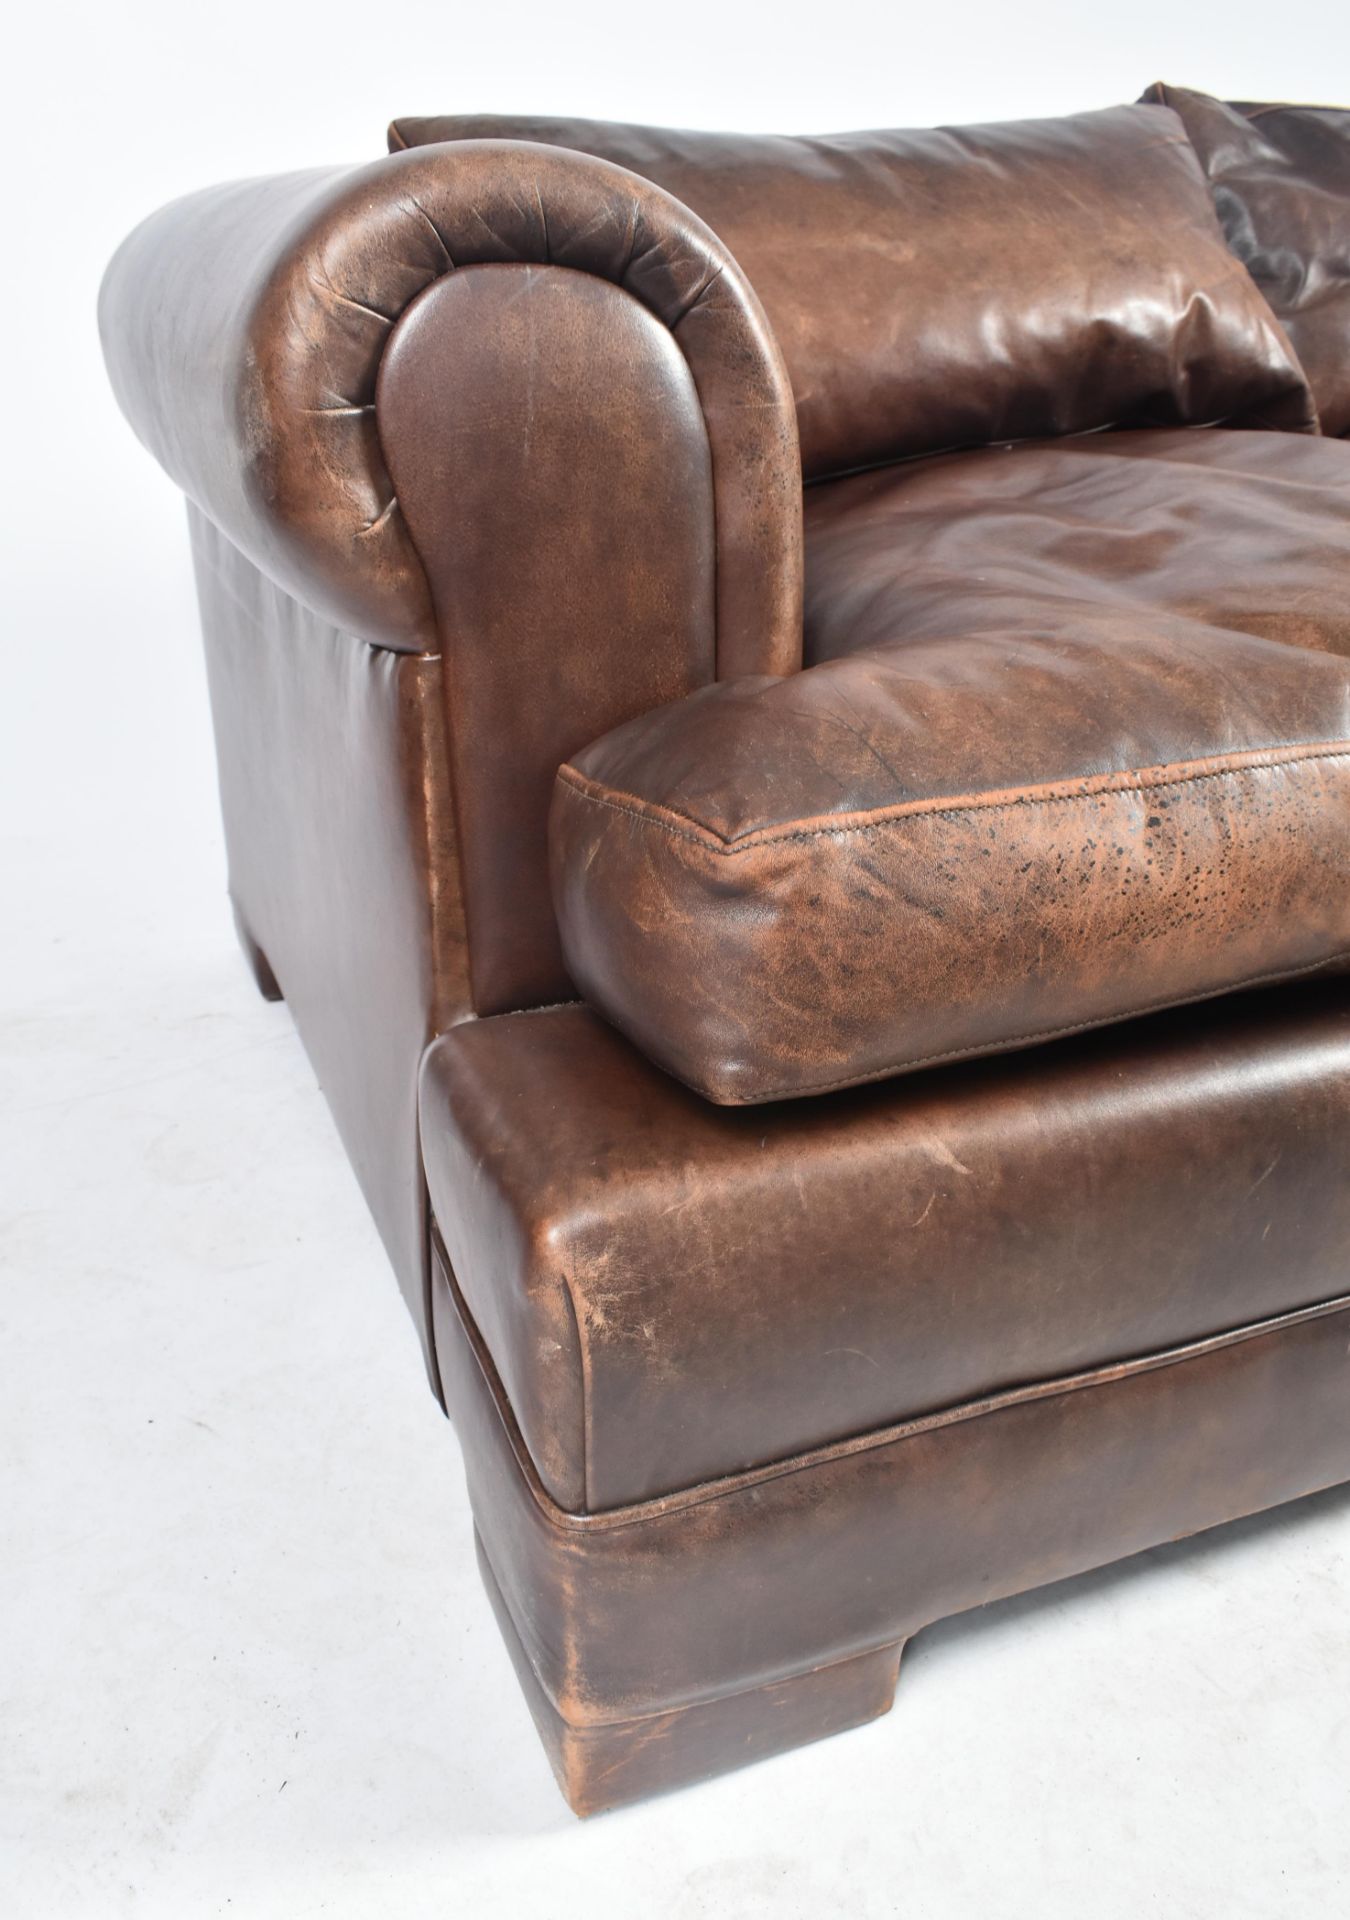 MODERN HIGH-END BRITISH DESIGN TWO SEATER LEATHER SOFA - Image 4 of 7